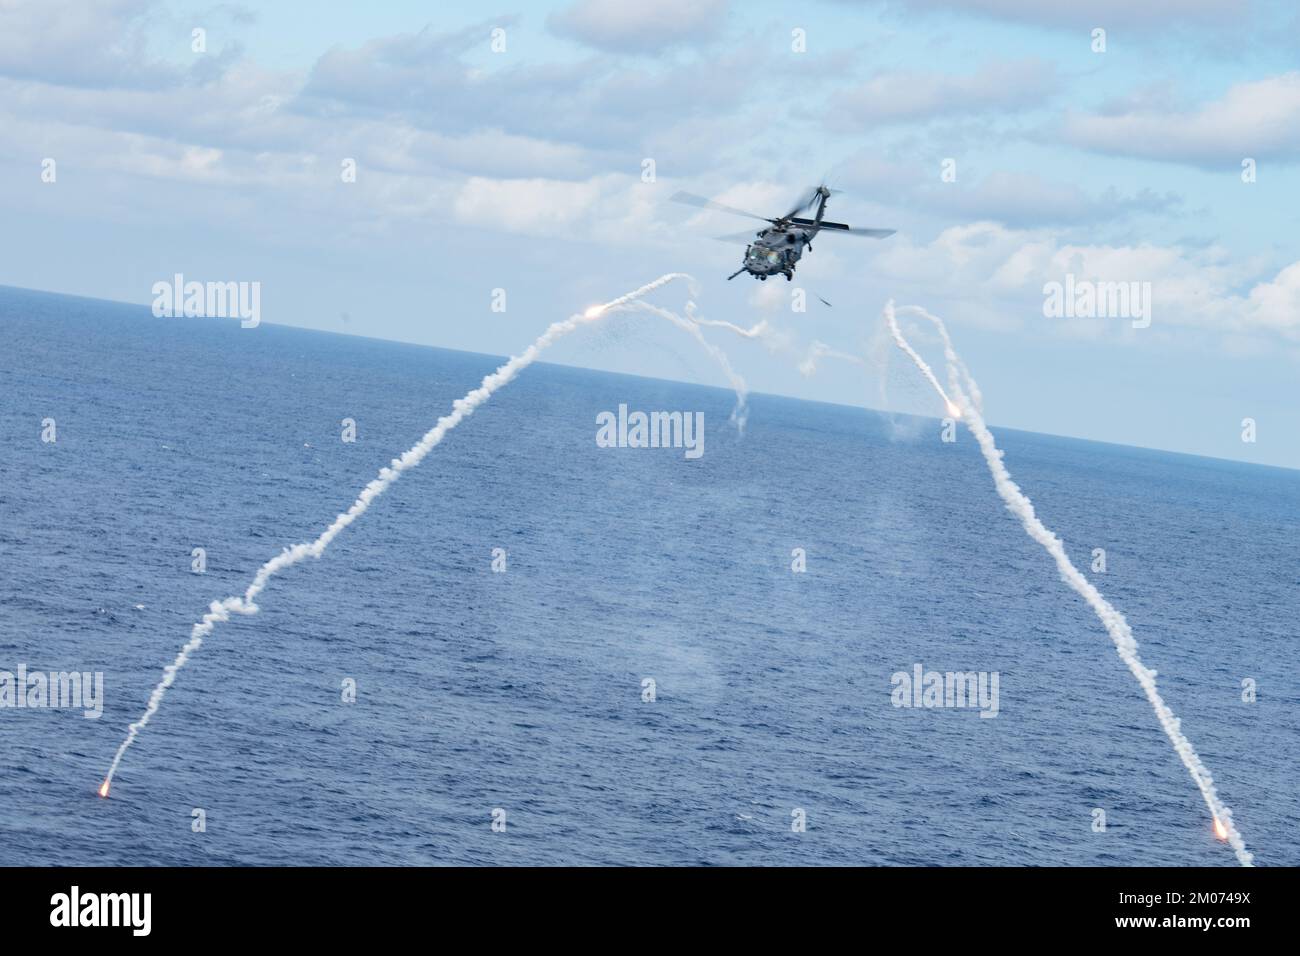 An HH-60 Pave Hawk from the 33rd Rescue Squadron shoots flares while conducting evasive maneuvers in a designated training area over the Pacific Ocean, Nov. 22, 2022. The 33rd RQS maintains readiness for mobilization, deployment and employment of helicopters and rescue of U.S. and allied military members, and civilian personnel. (U.S. Air Force photo by Senior Airman Cesar J. Navarro) Stock Photo